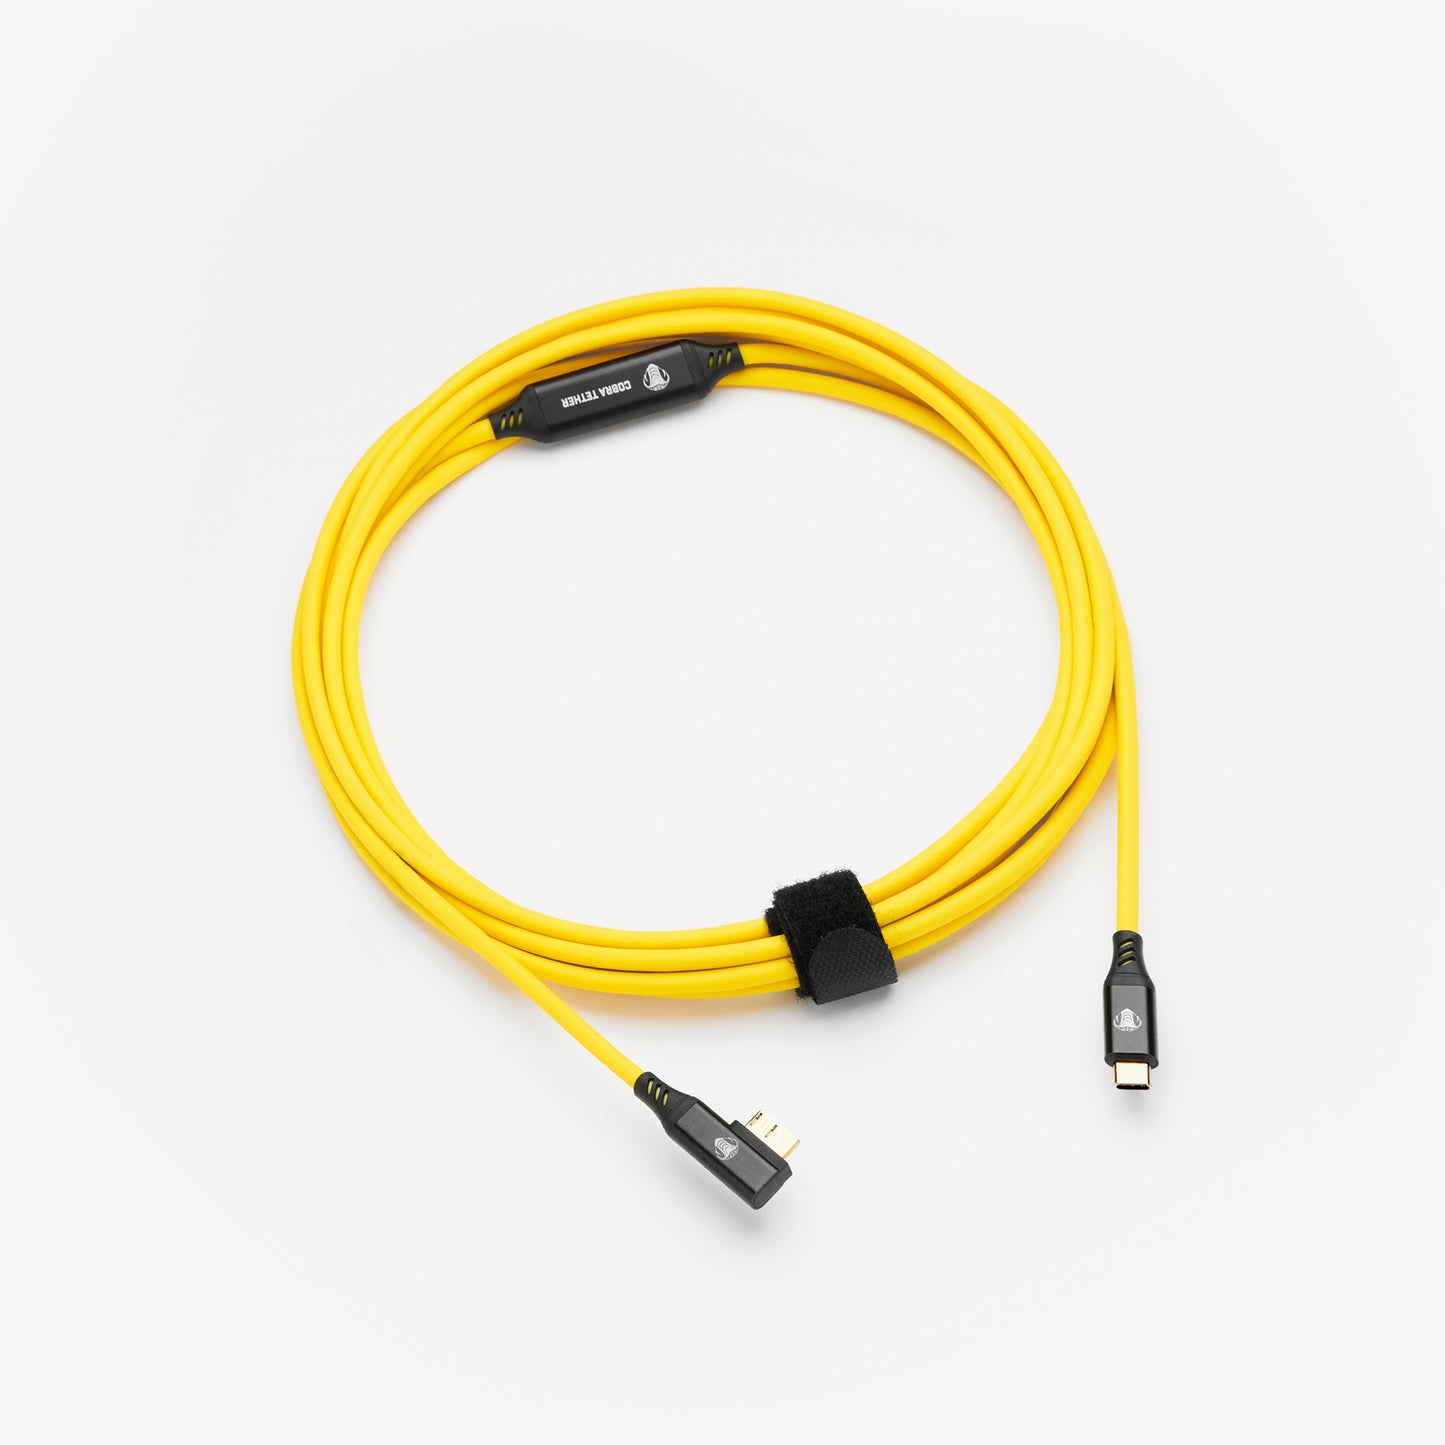 USB Micro-B Tether Cable